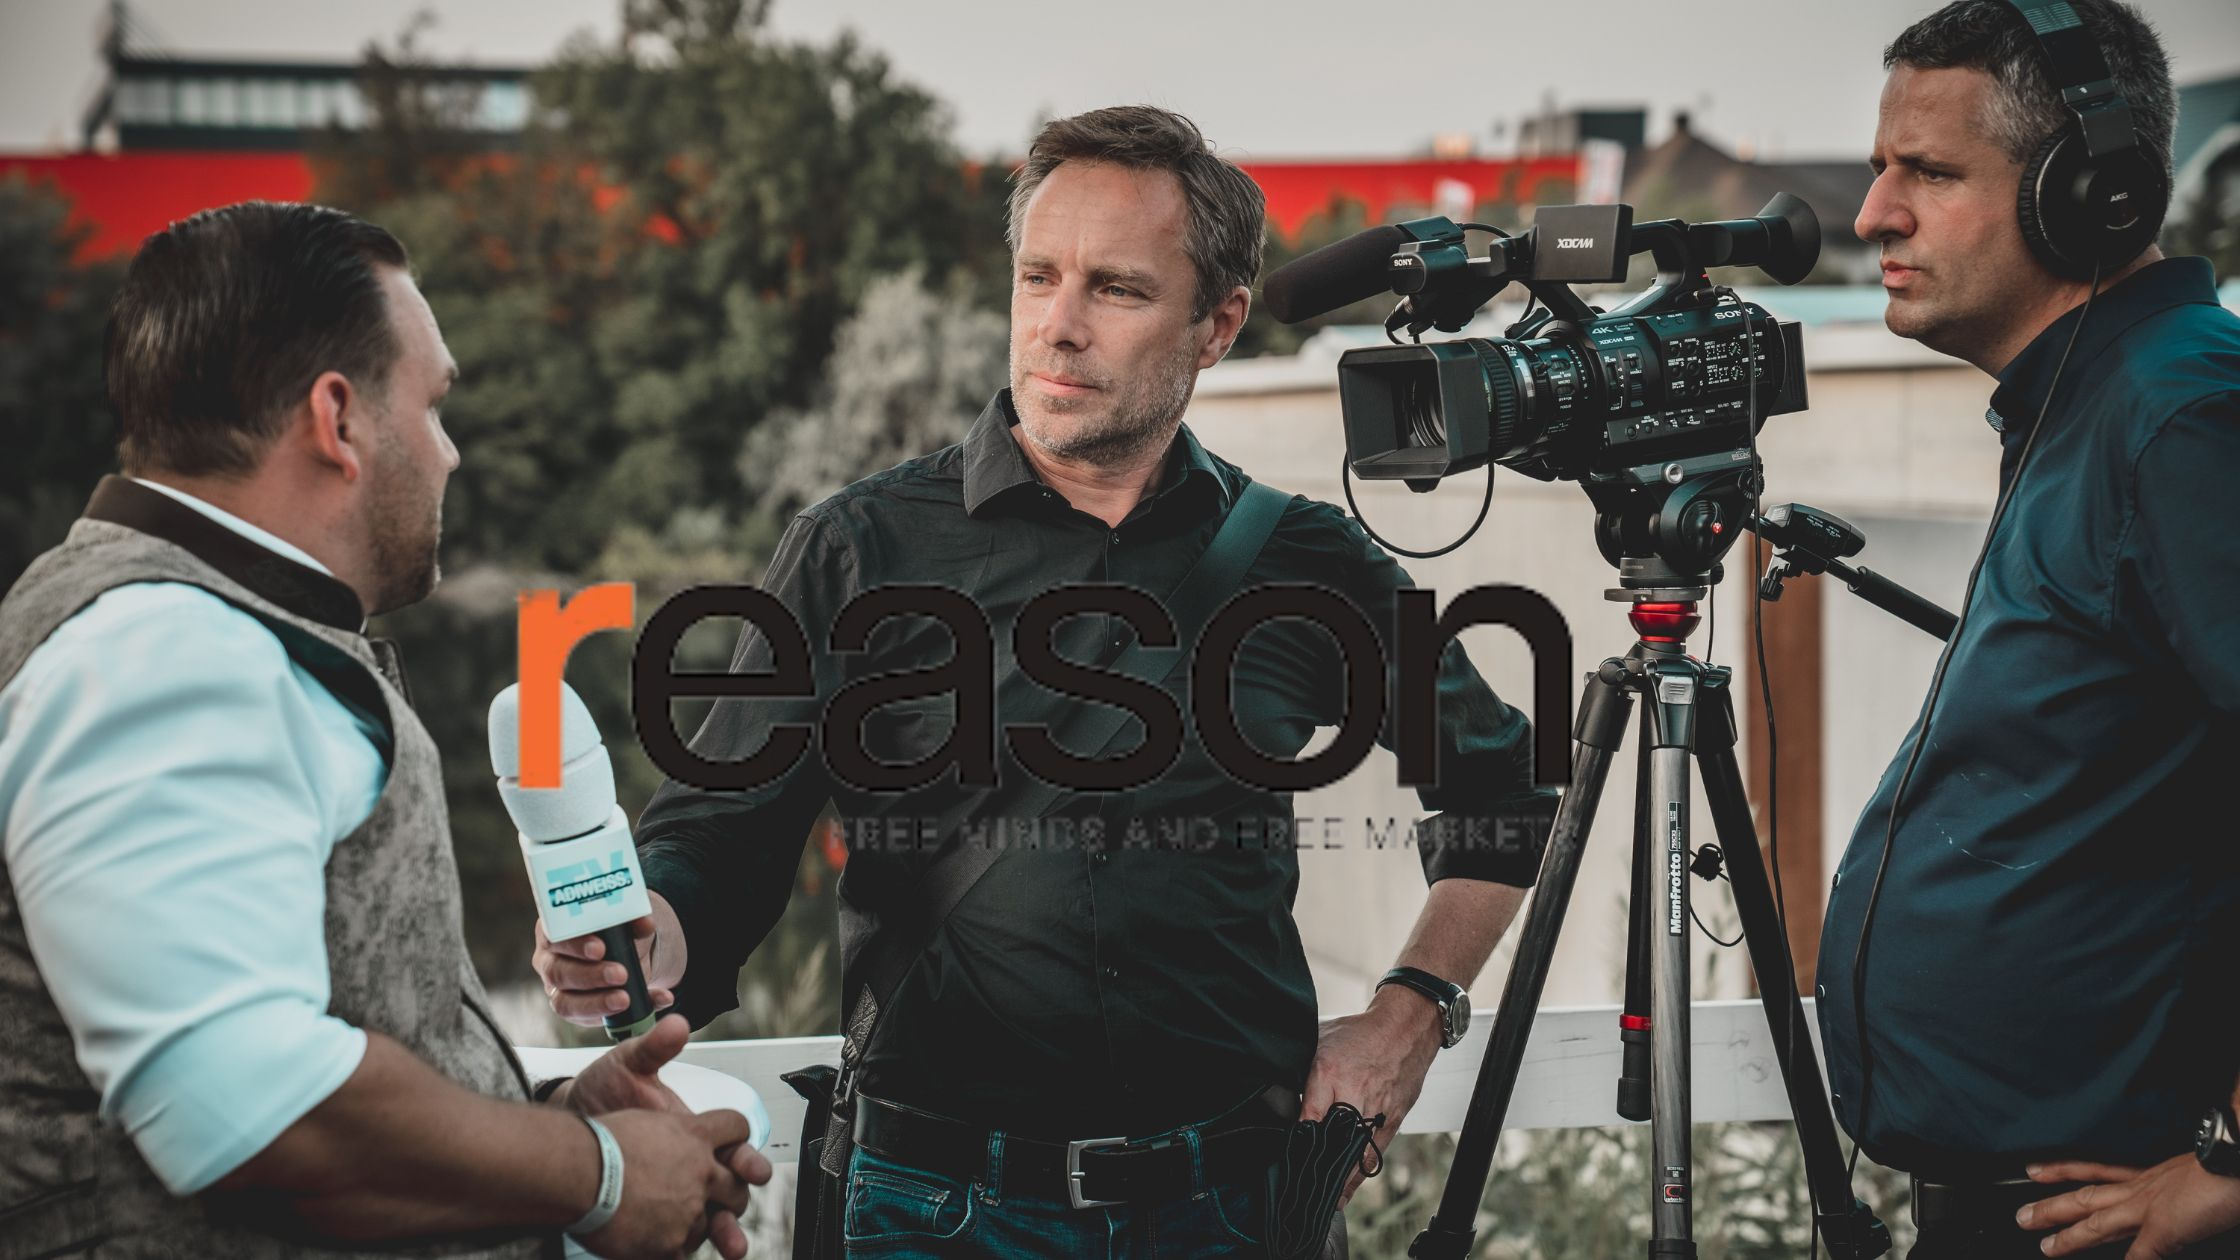 Why Reason Magazine's Internship is the Perfect Opportunity for Aspiring Journalists